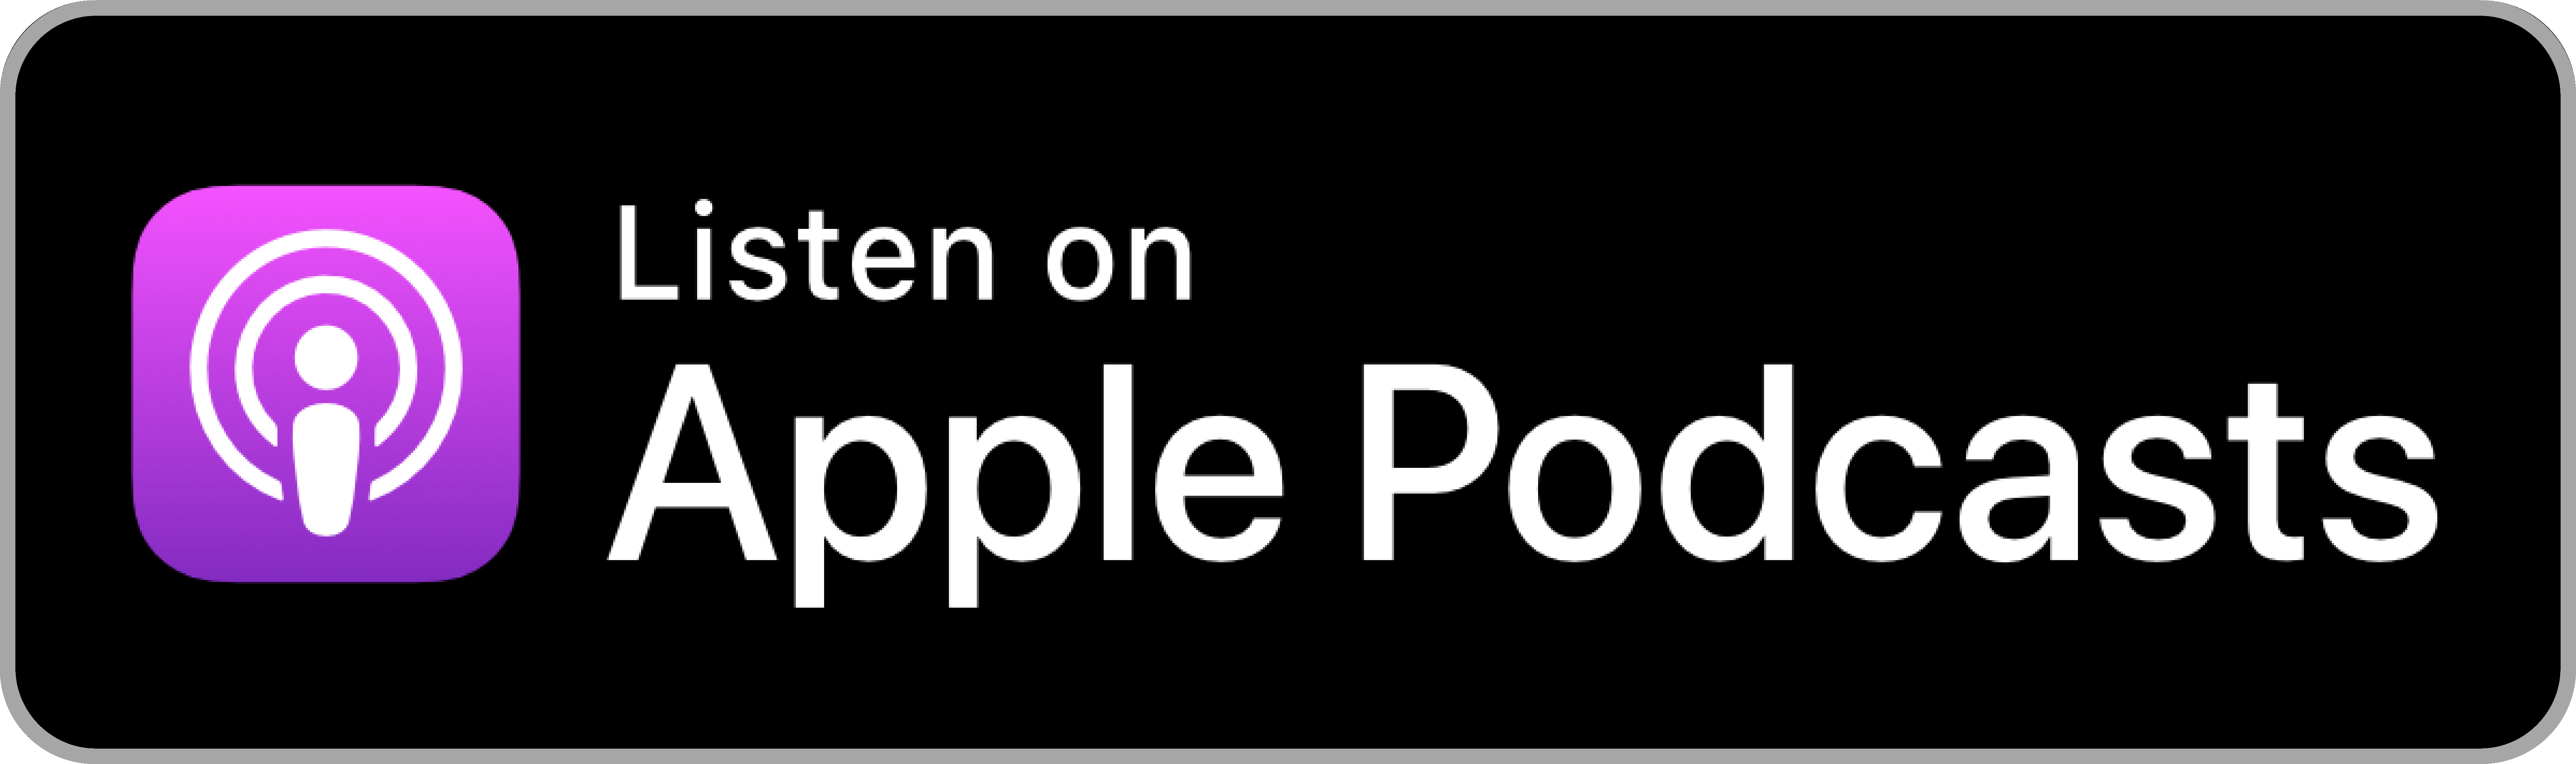 podcast_page_apple.png